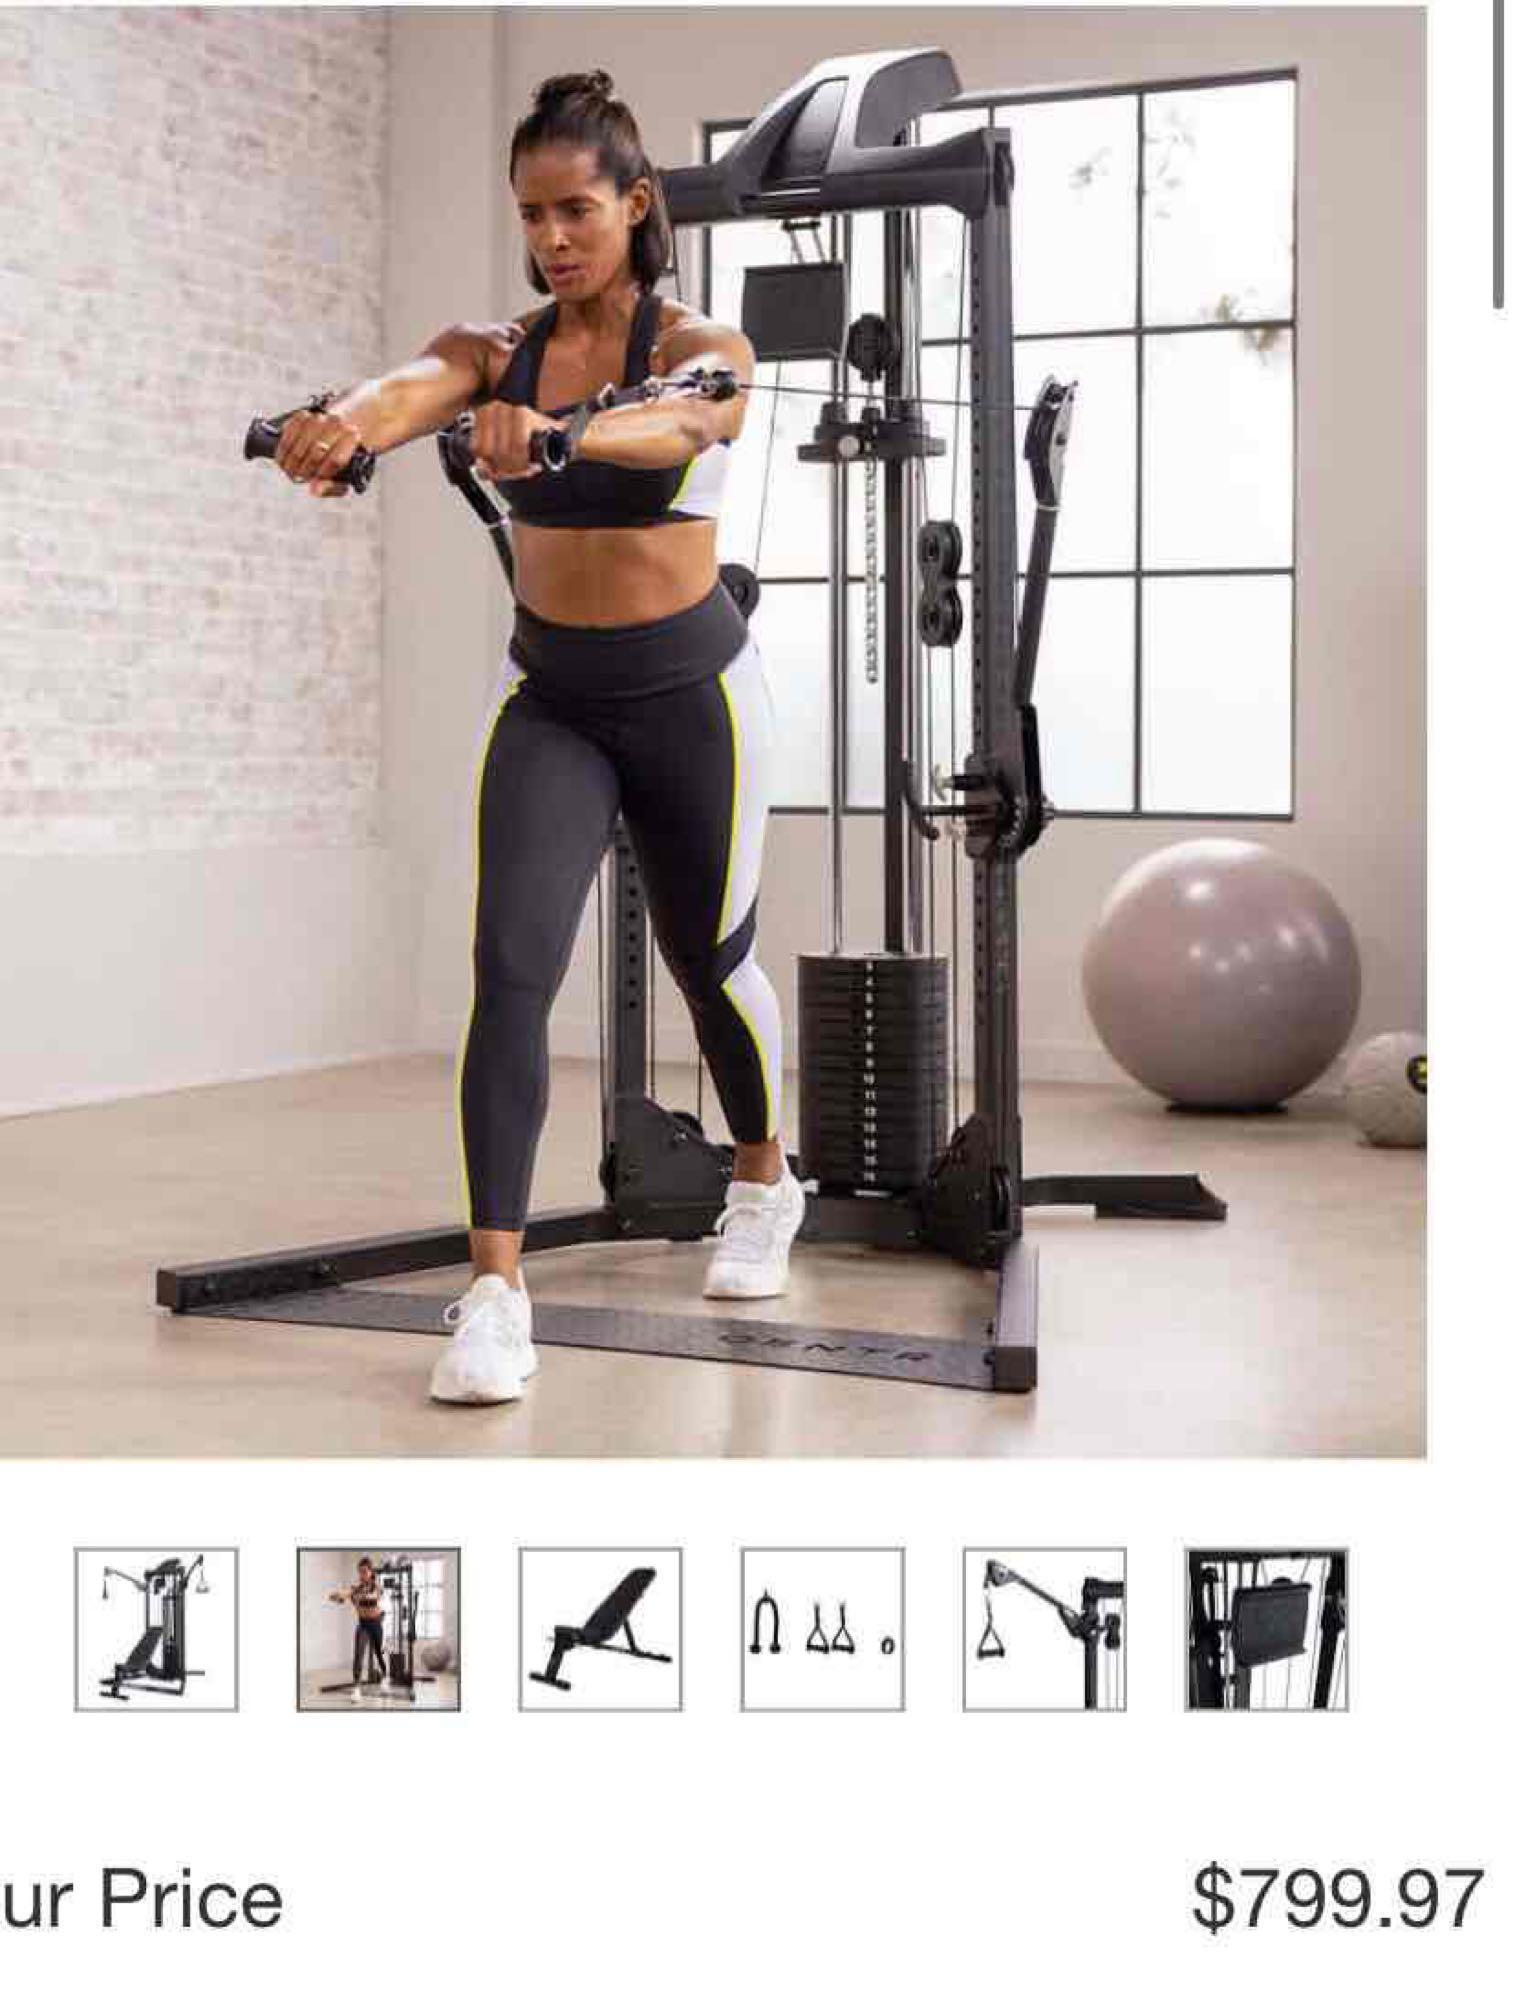 Home Gym Functional Trainer With Folding Workout Bench